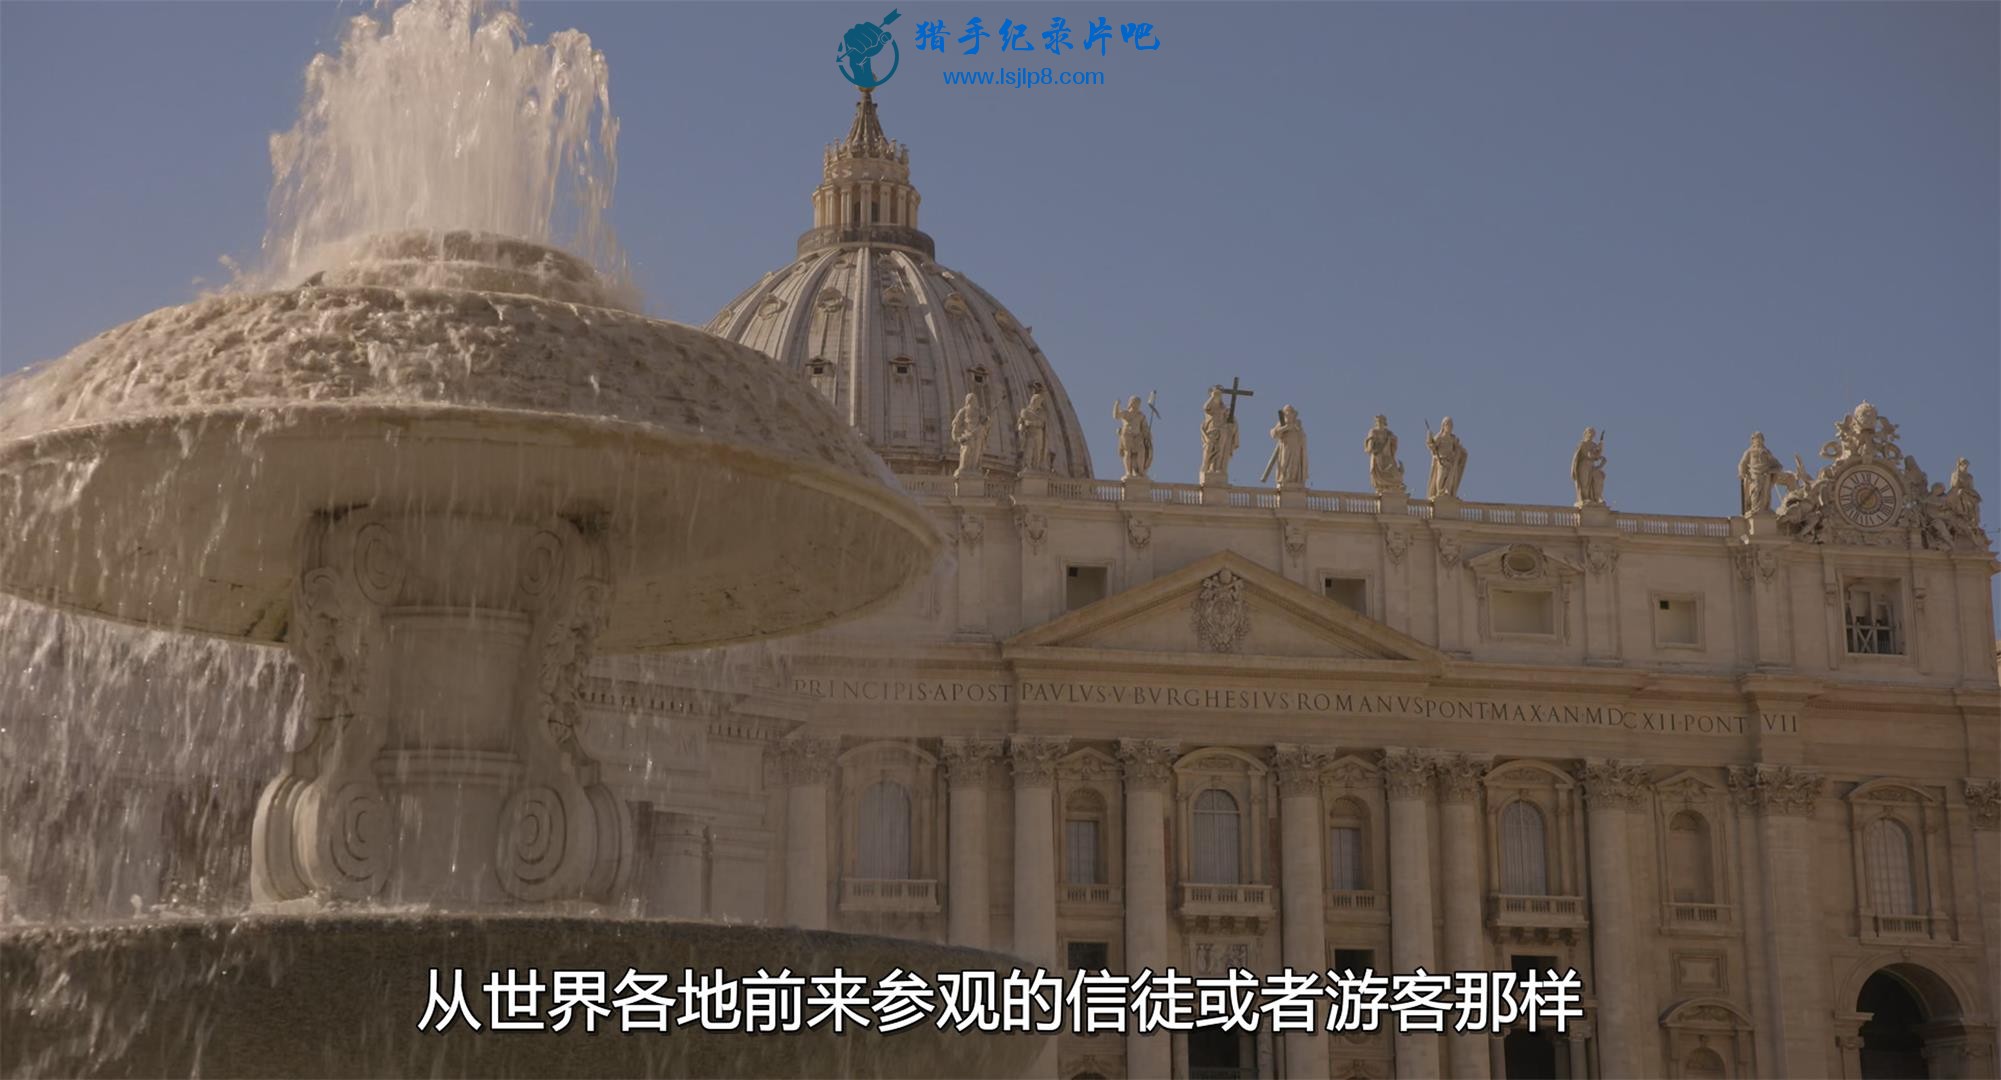 St Peters and the Papal Basilicas of Rome 2016 2160p UHD Blu-ray SDR HEVC DTS-HD.jpg